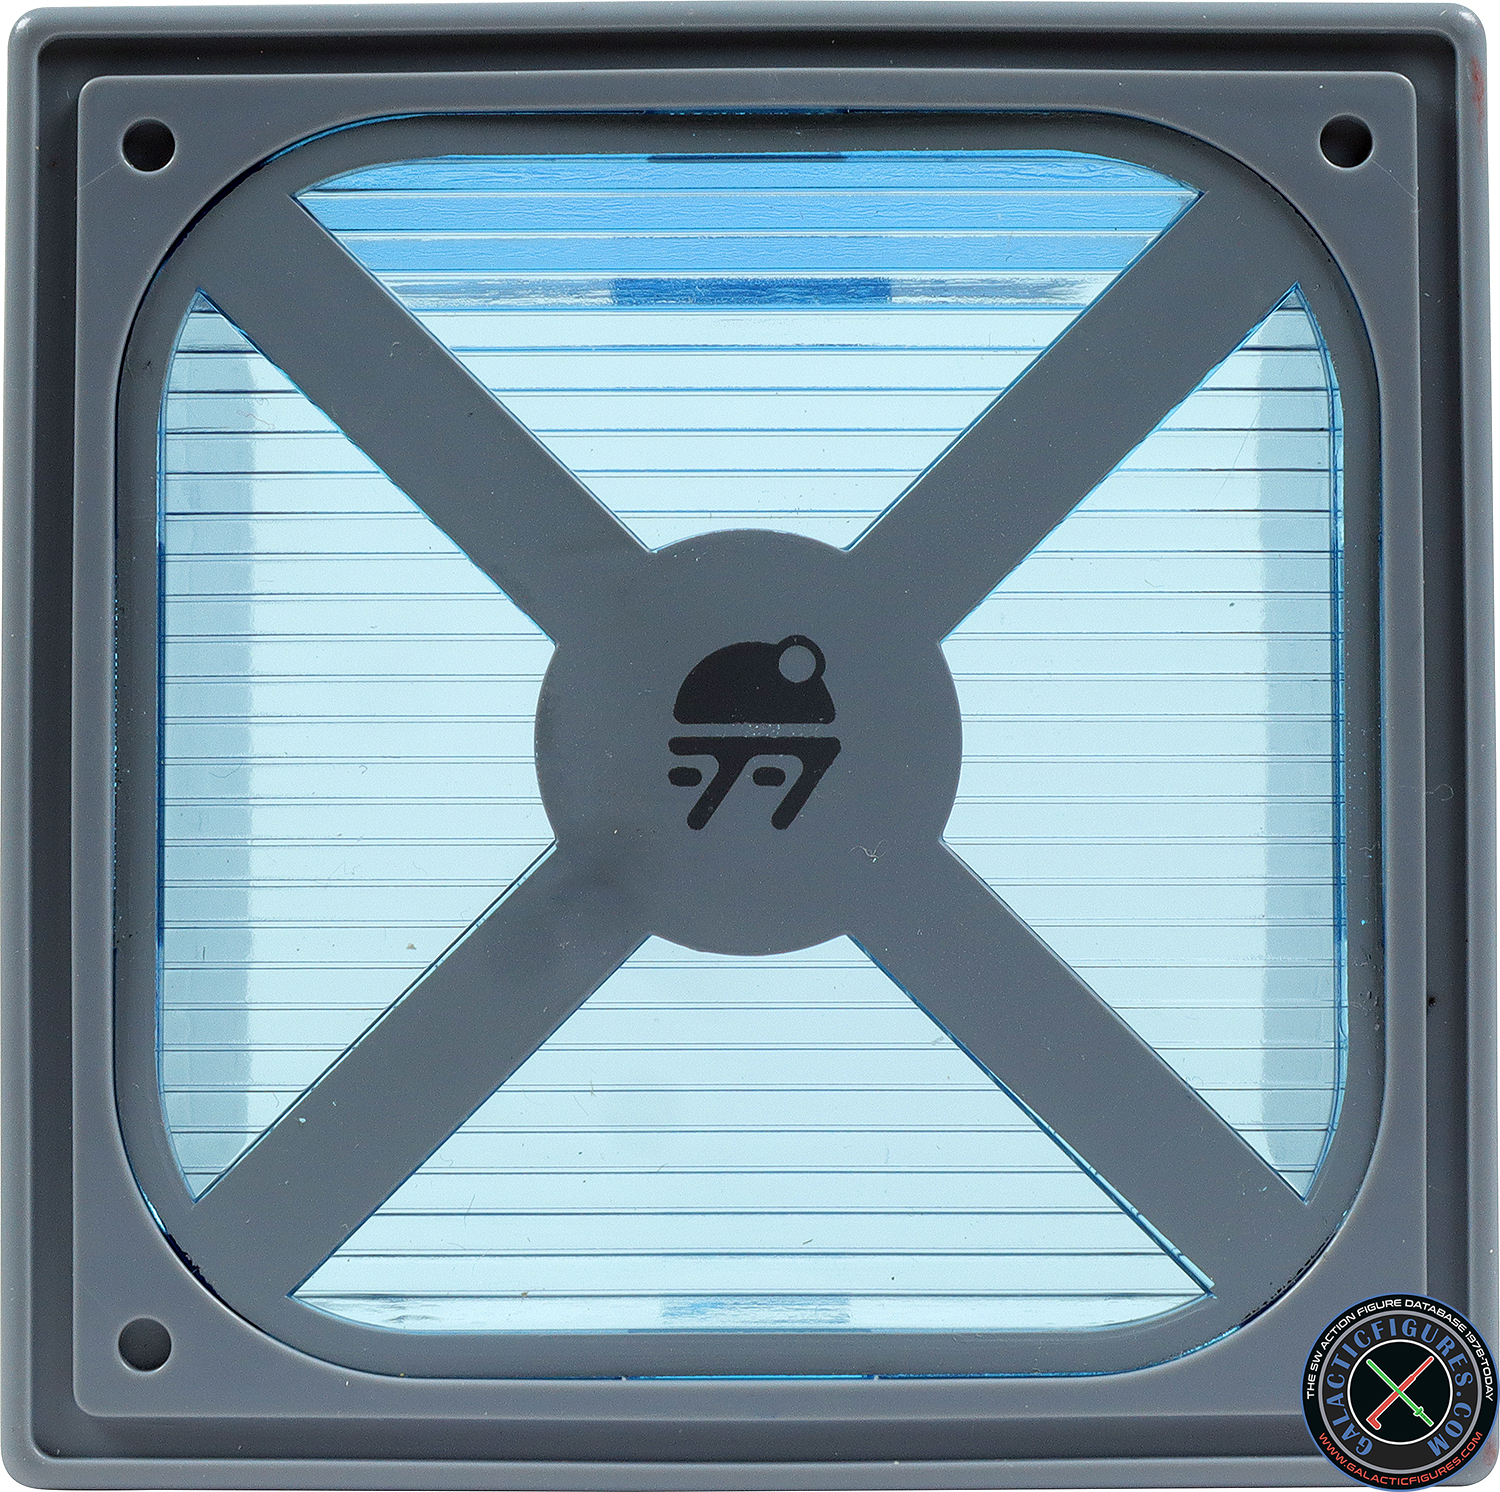 S3-R9 Droid Factory Mystery Crate 2021